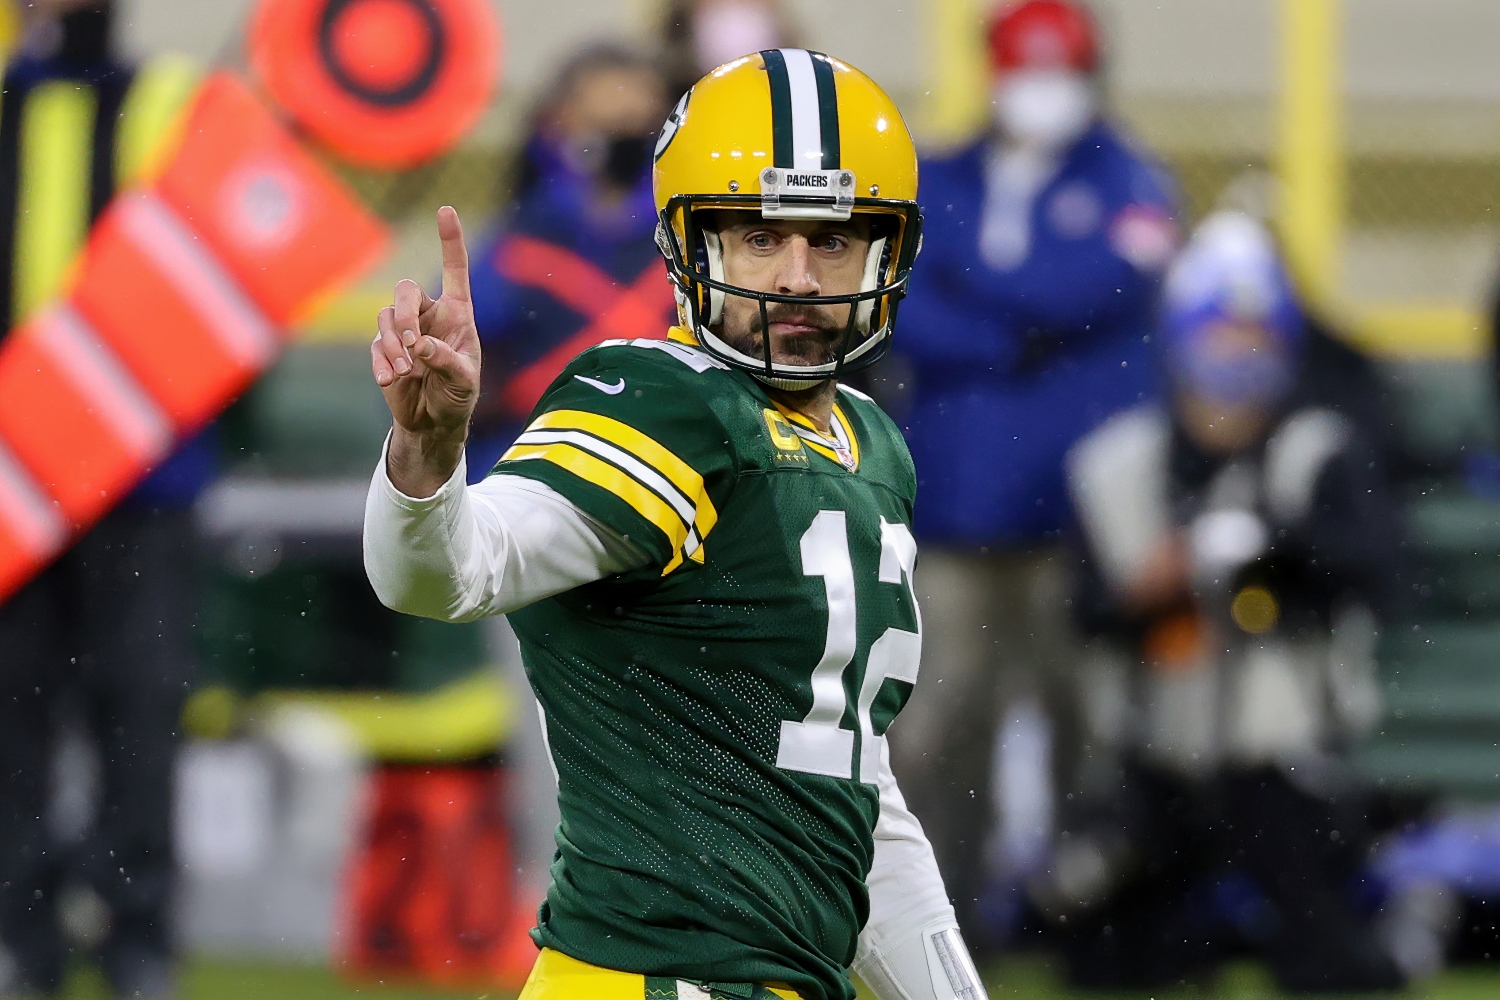 Green Bay Packers QB Aaron Rodgers signals to the sideline during a game.